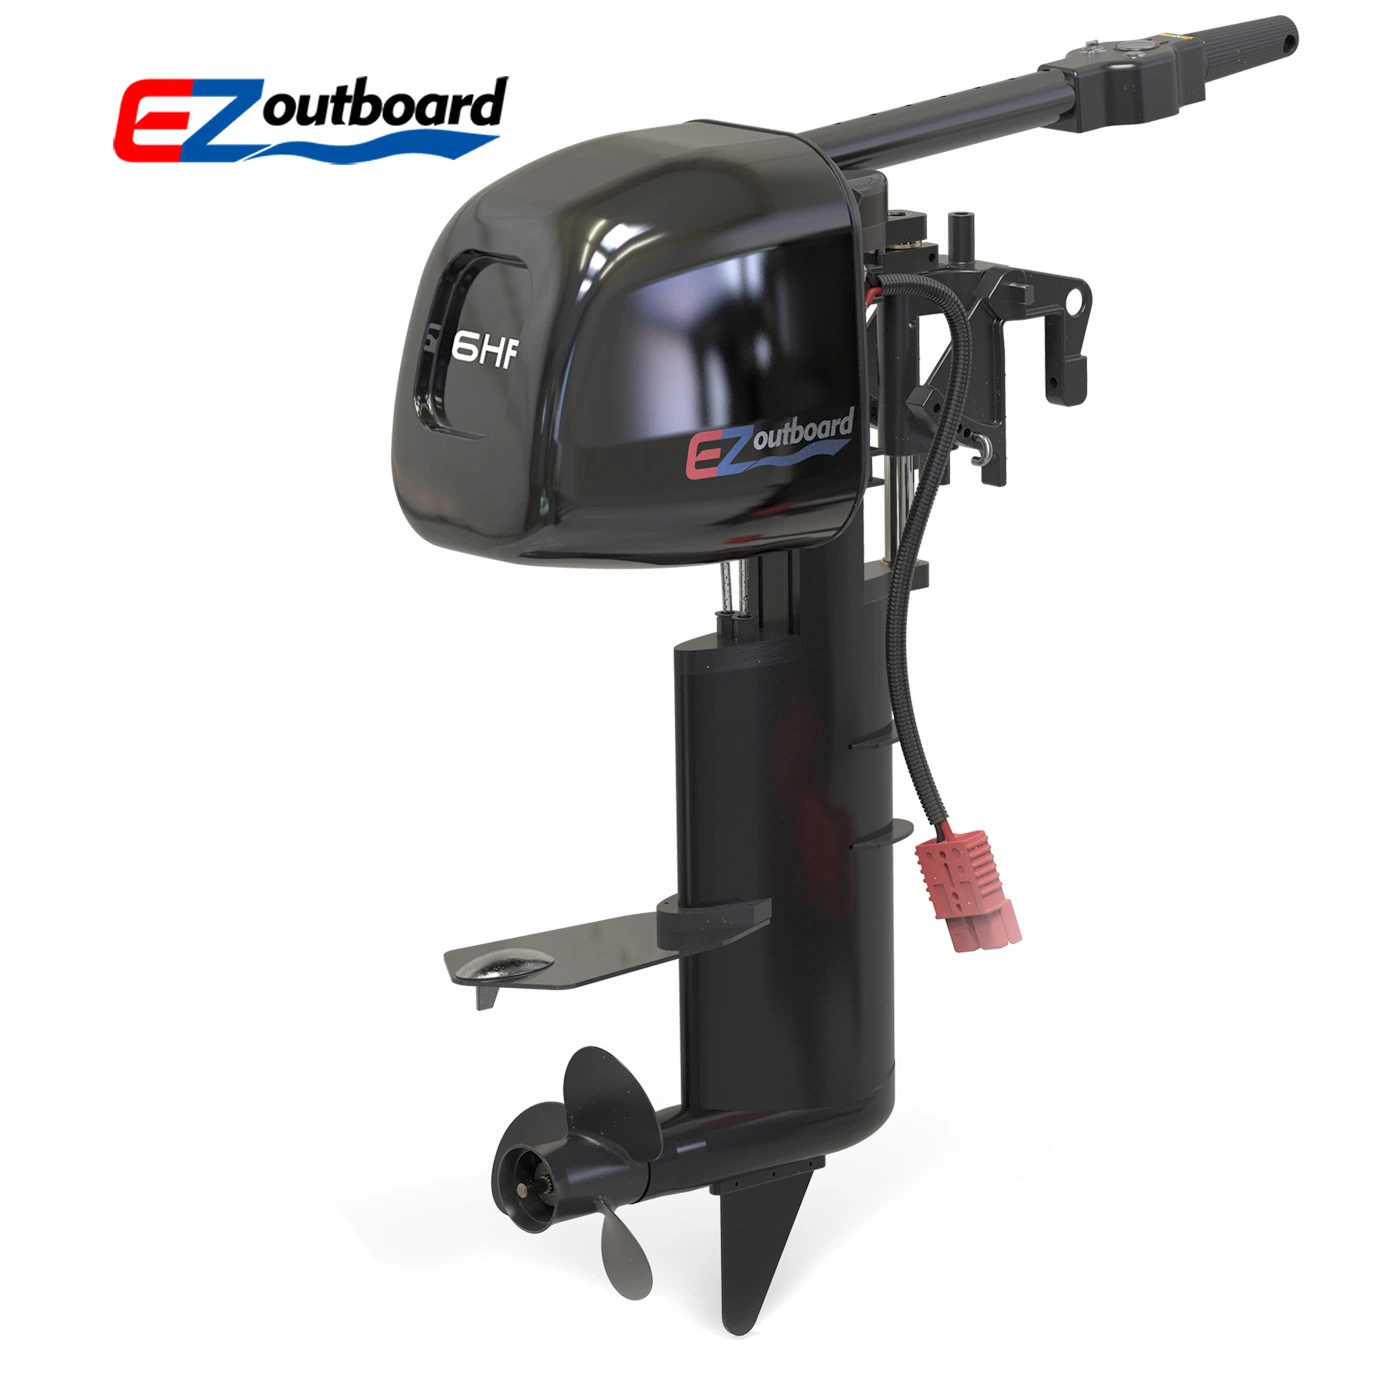 Remote and Tiller New EZ Outboard sport version 6HP 10HP 20HP Electric Propulsion Outboard Motor for Boat and ship